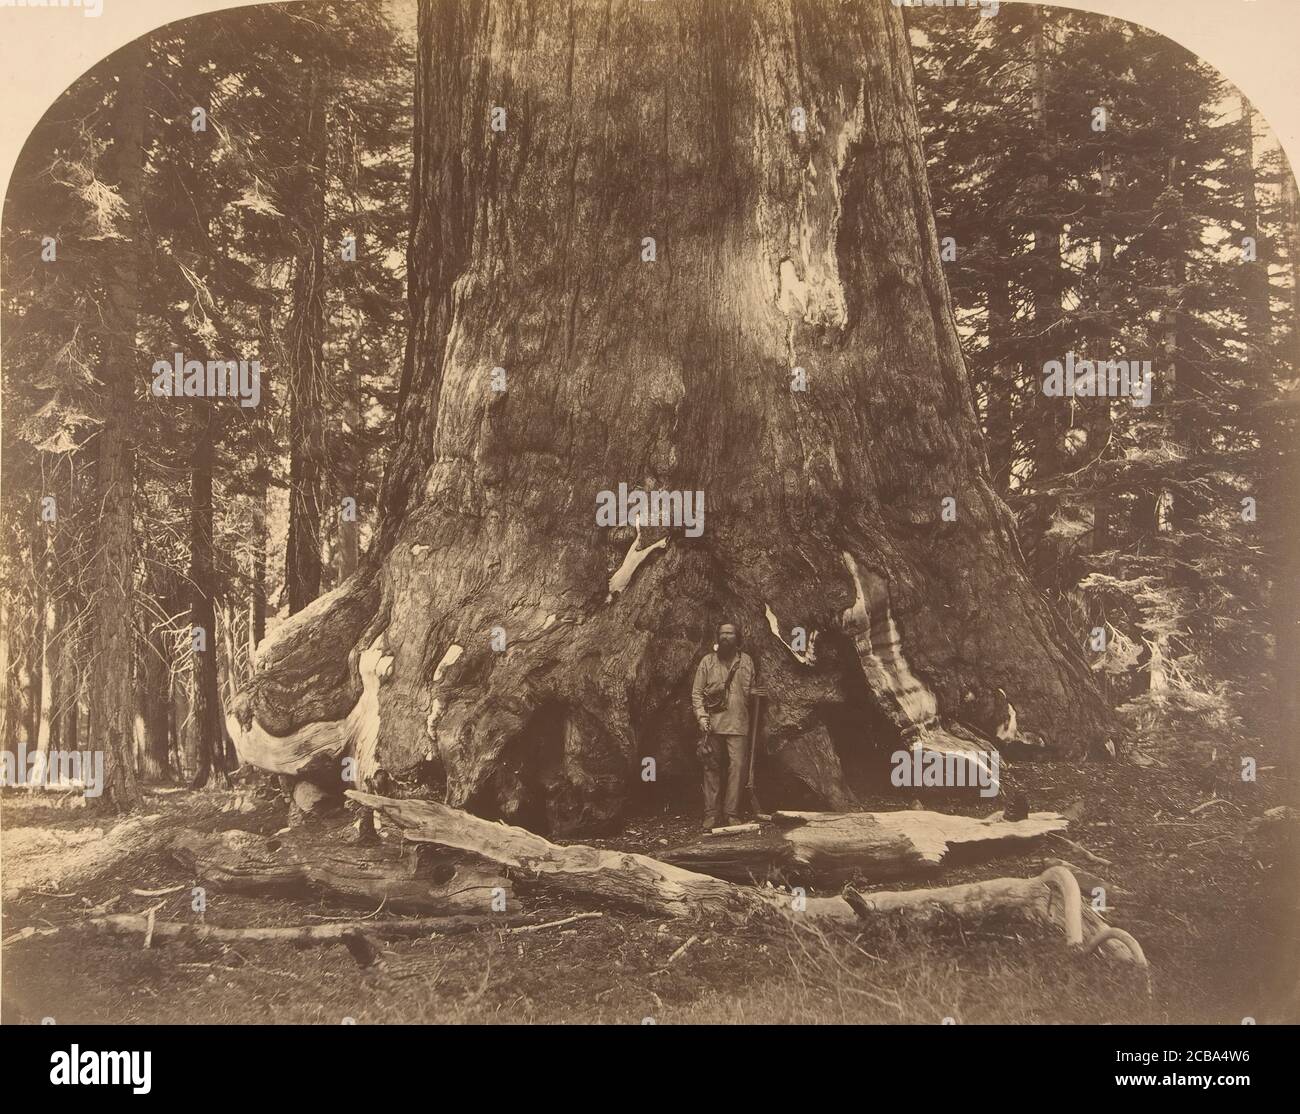 Section of Grisly Giant, Mariposa Grove, 1861. Stock Photo